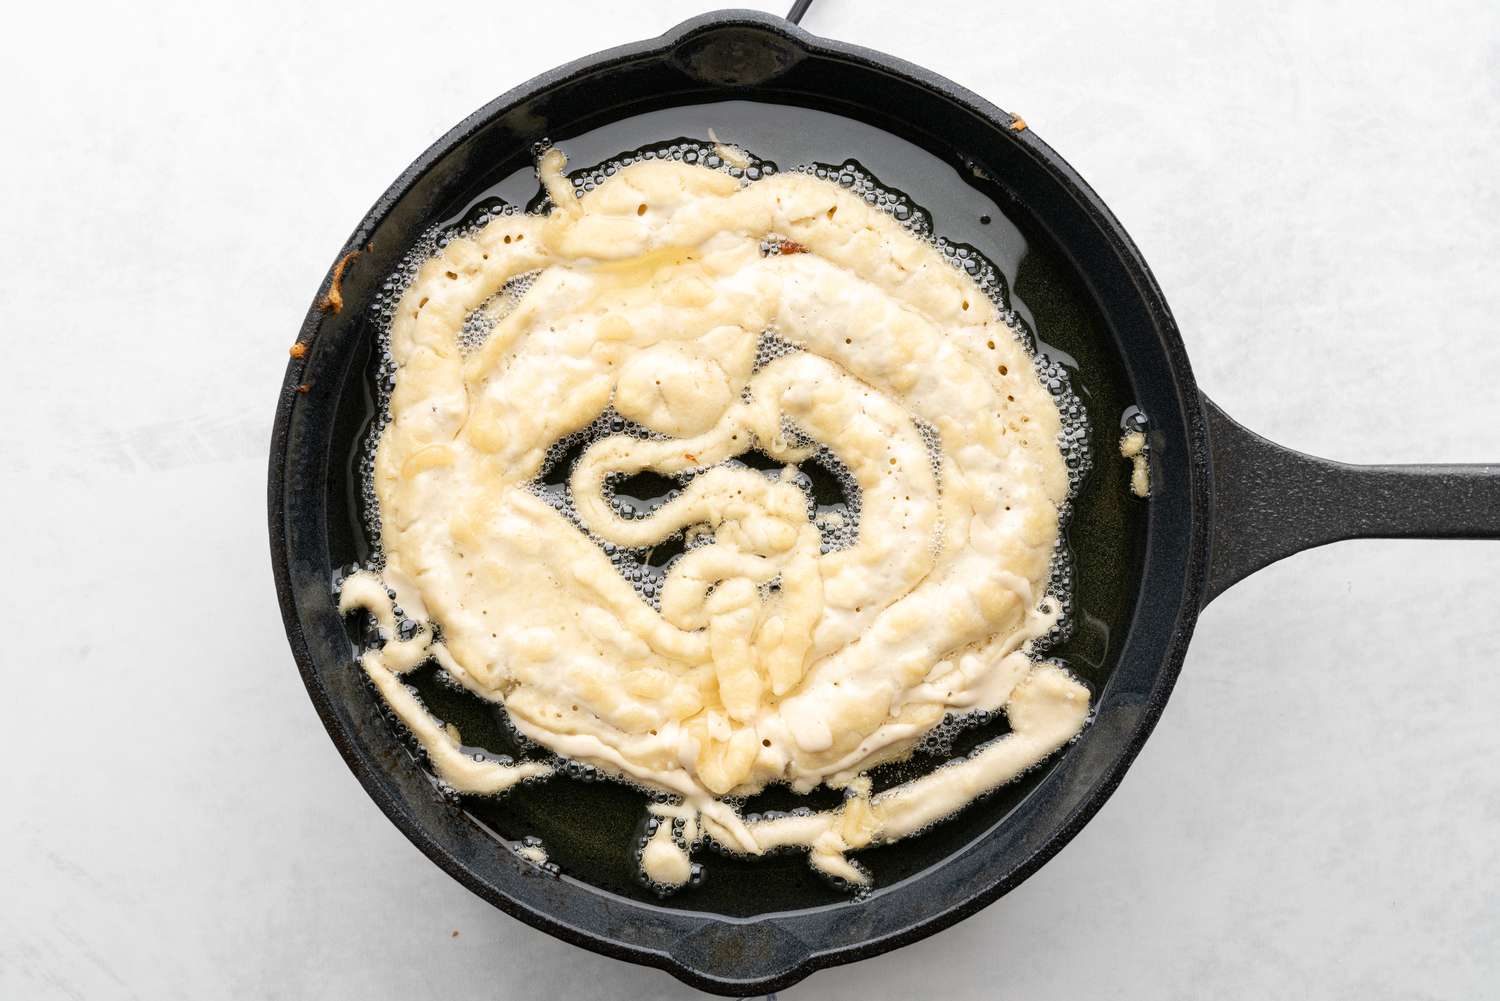 Funnel cake in a round, squiggly pattern almost entirely filling the skillet with the hot oil 